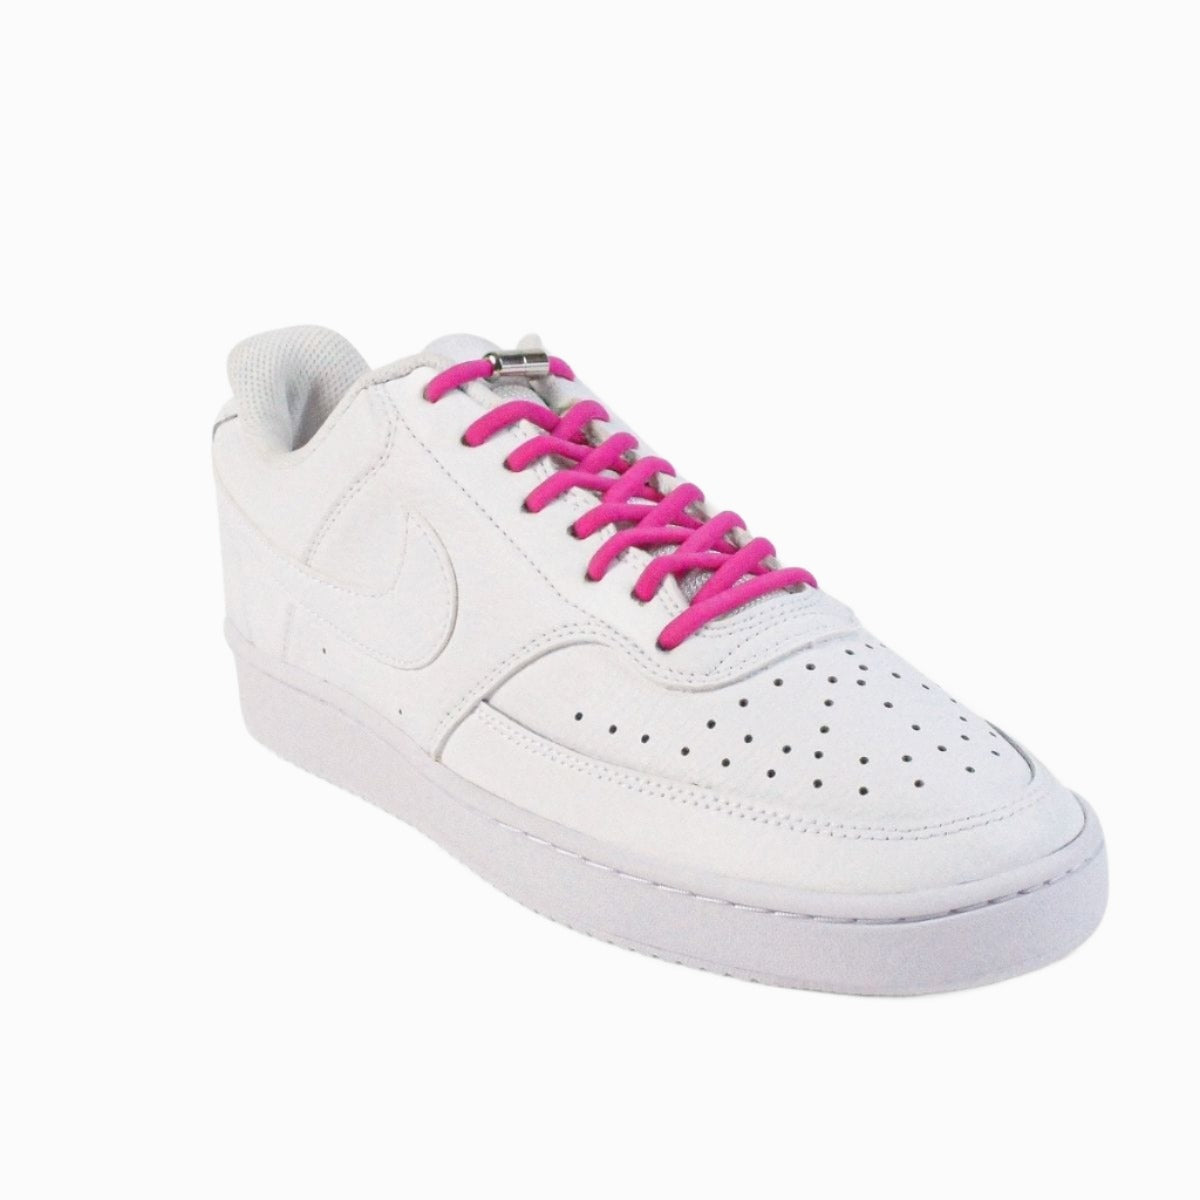 round-no-tie-shoelaces-with-rose-pink-laces-on-nike-white-sneakers-by-kicks-shoelaces